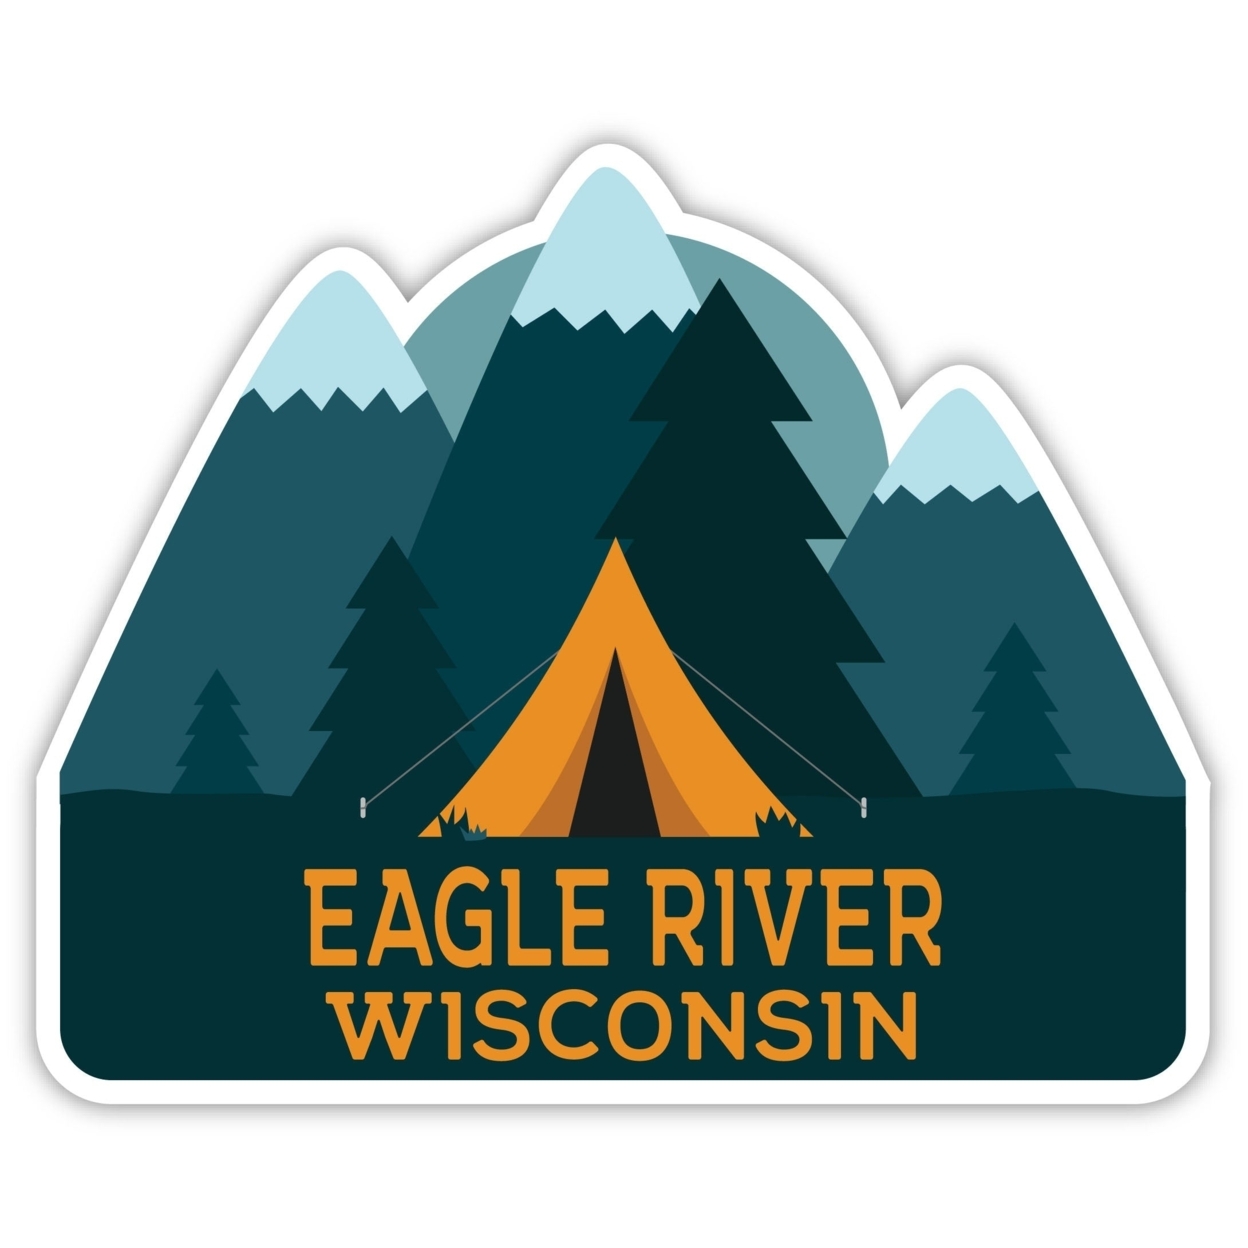 Eagle River Wisconsin Souvenir Decorative Stickers (Choose Theme And Size) - Single Unit, 4-Inch, Camp Life